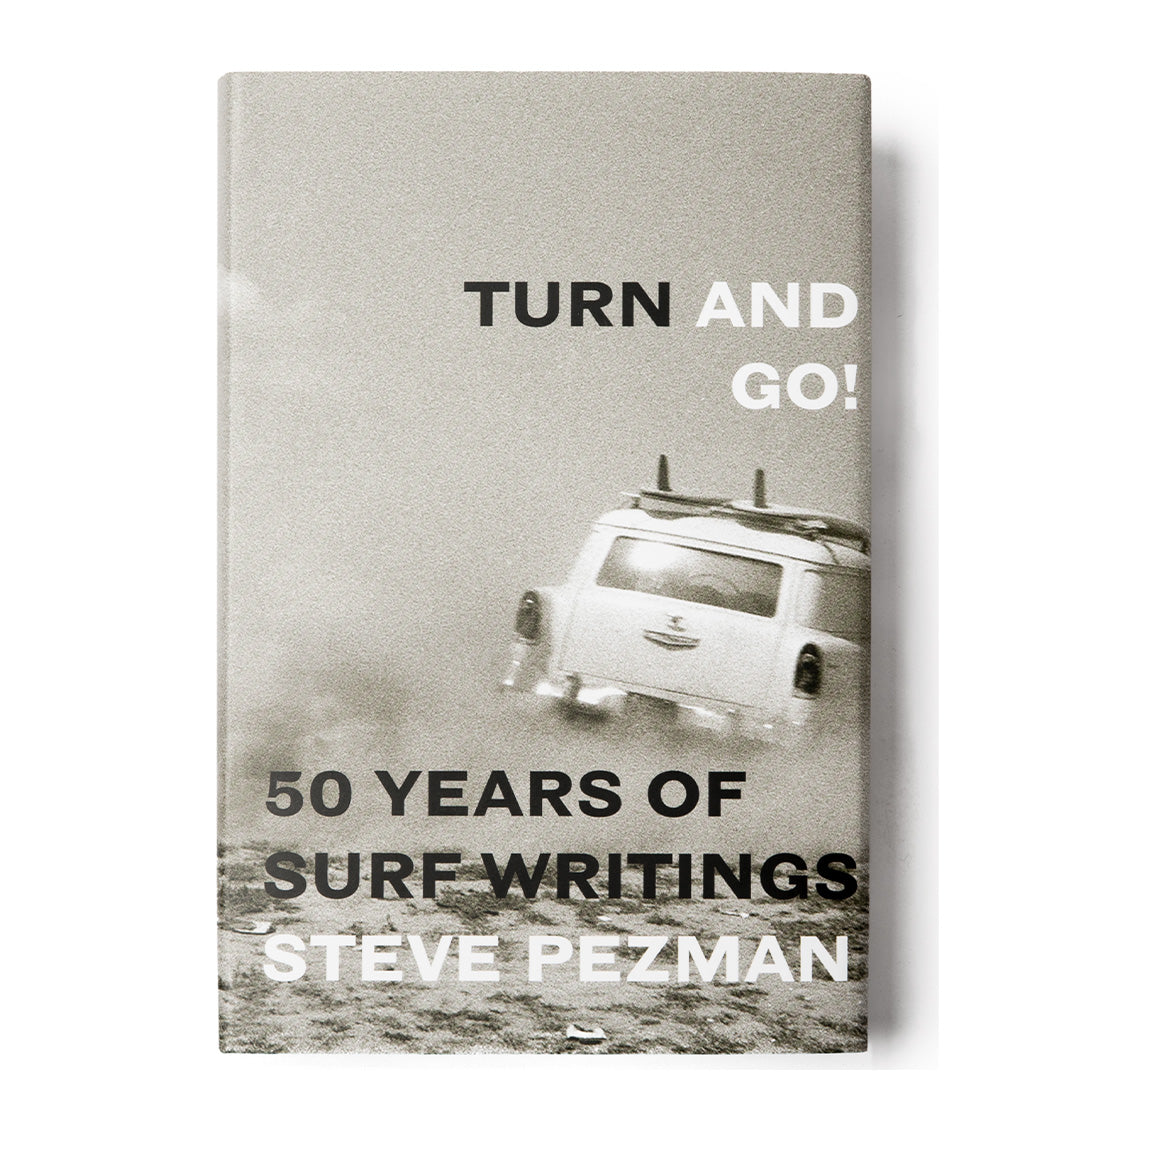 TURN AND GO - 50 YEARS OF SURF